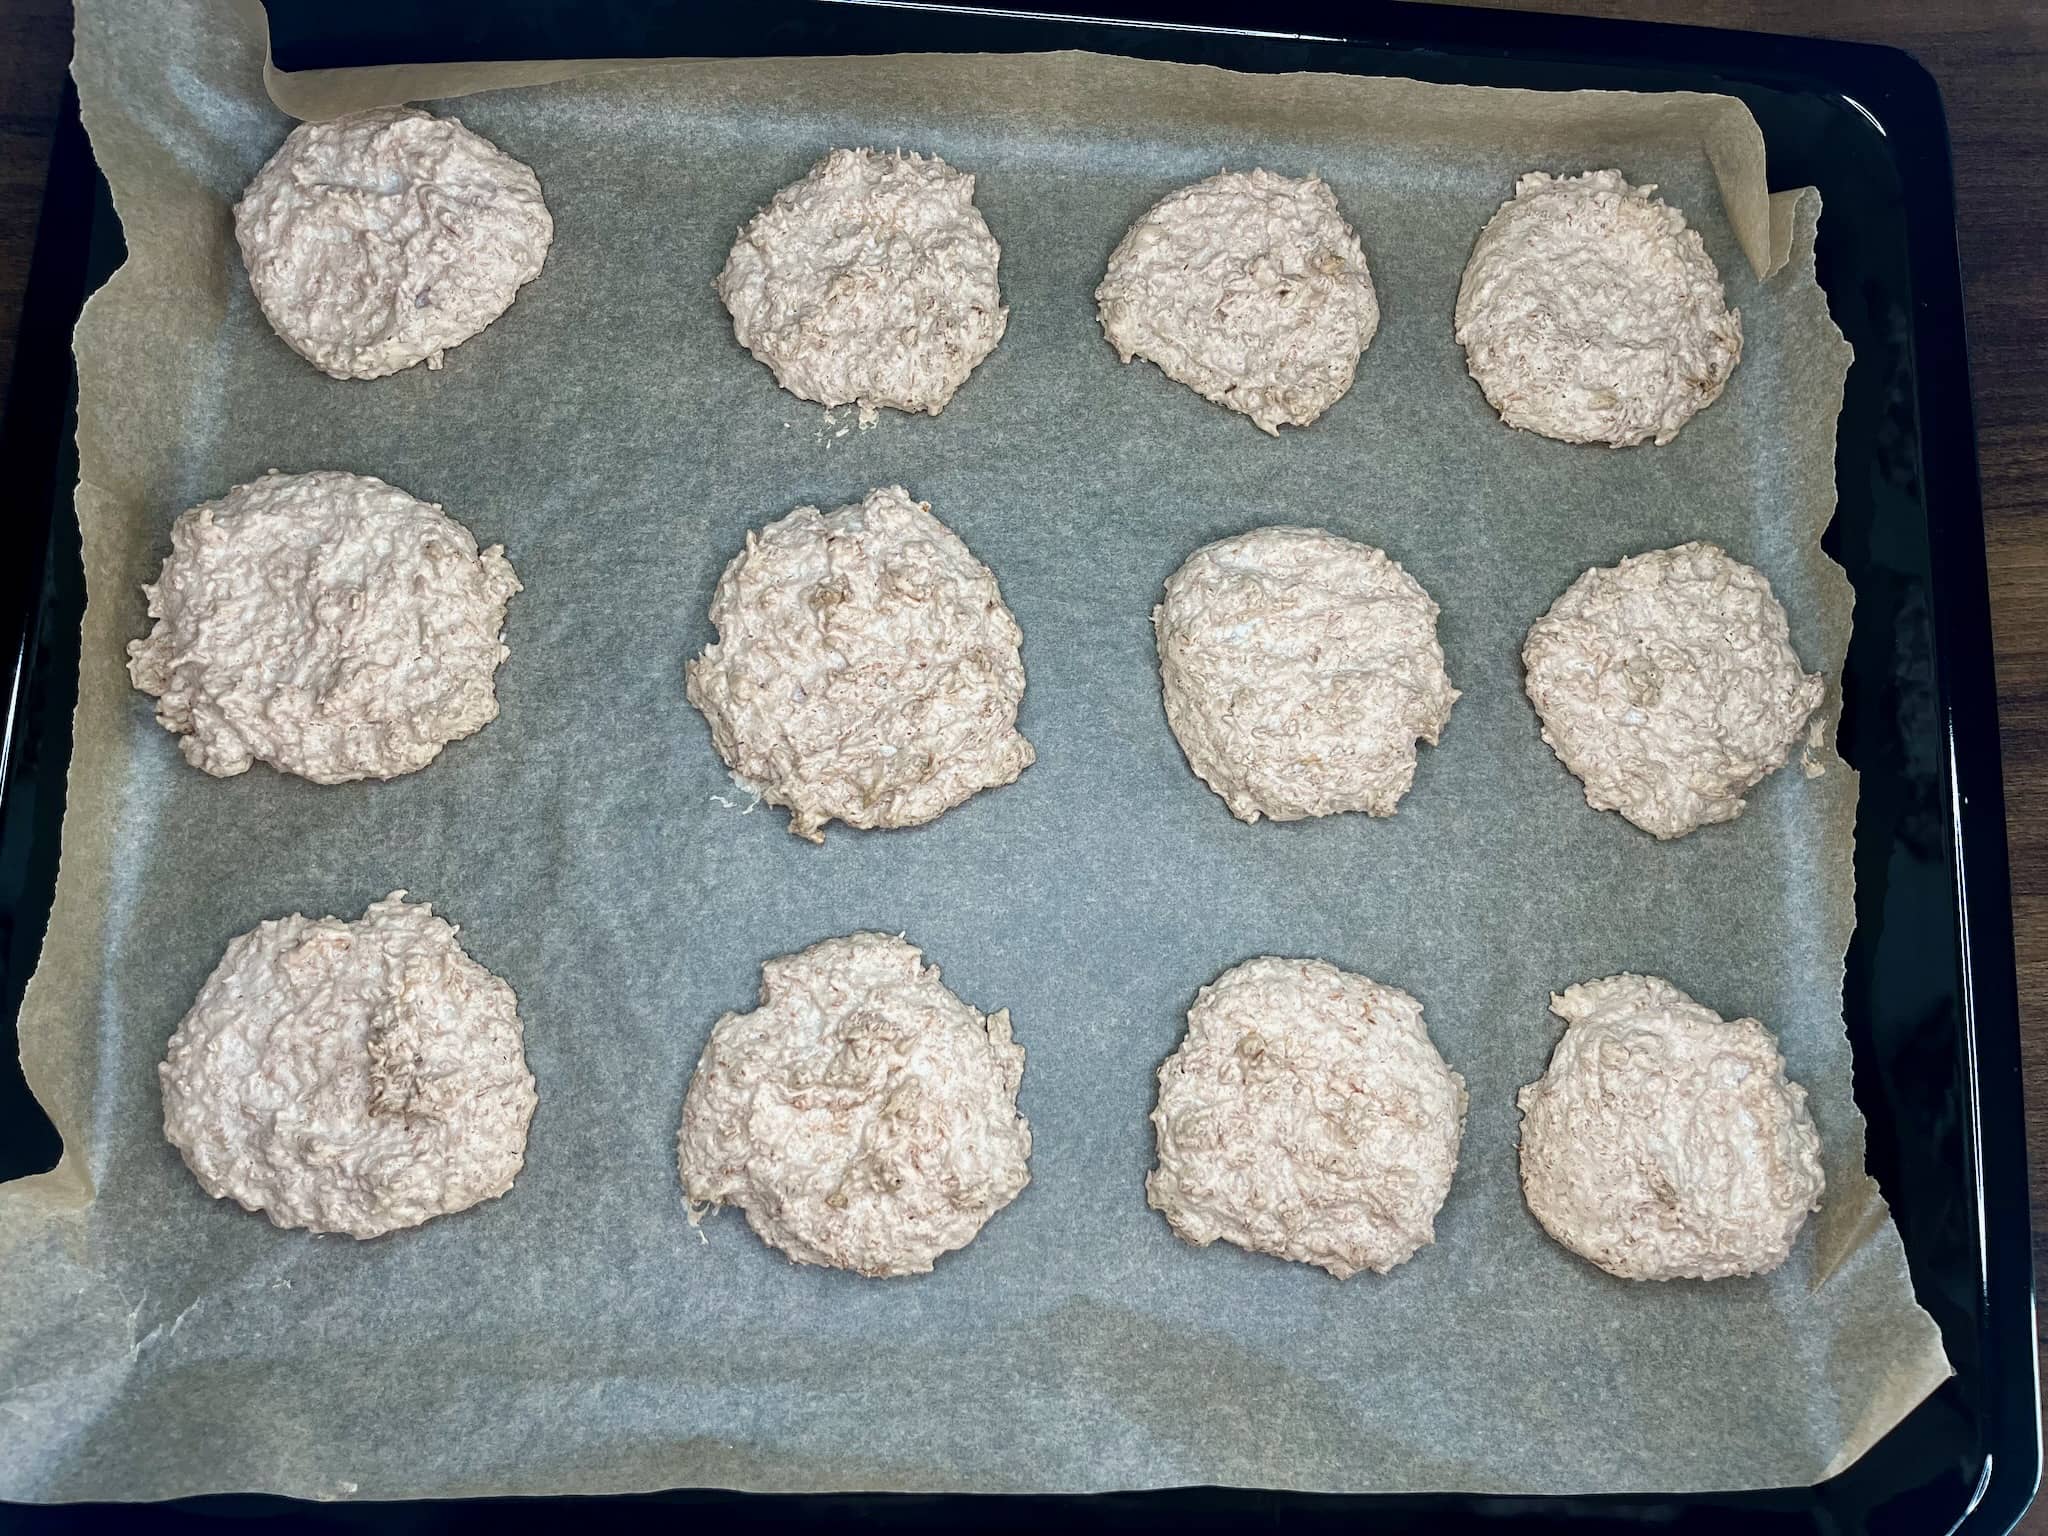 Freshly baked coconut meringue cookies, straight out of the oven